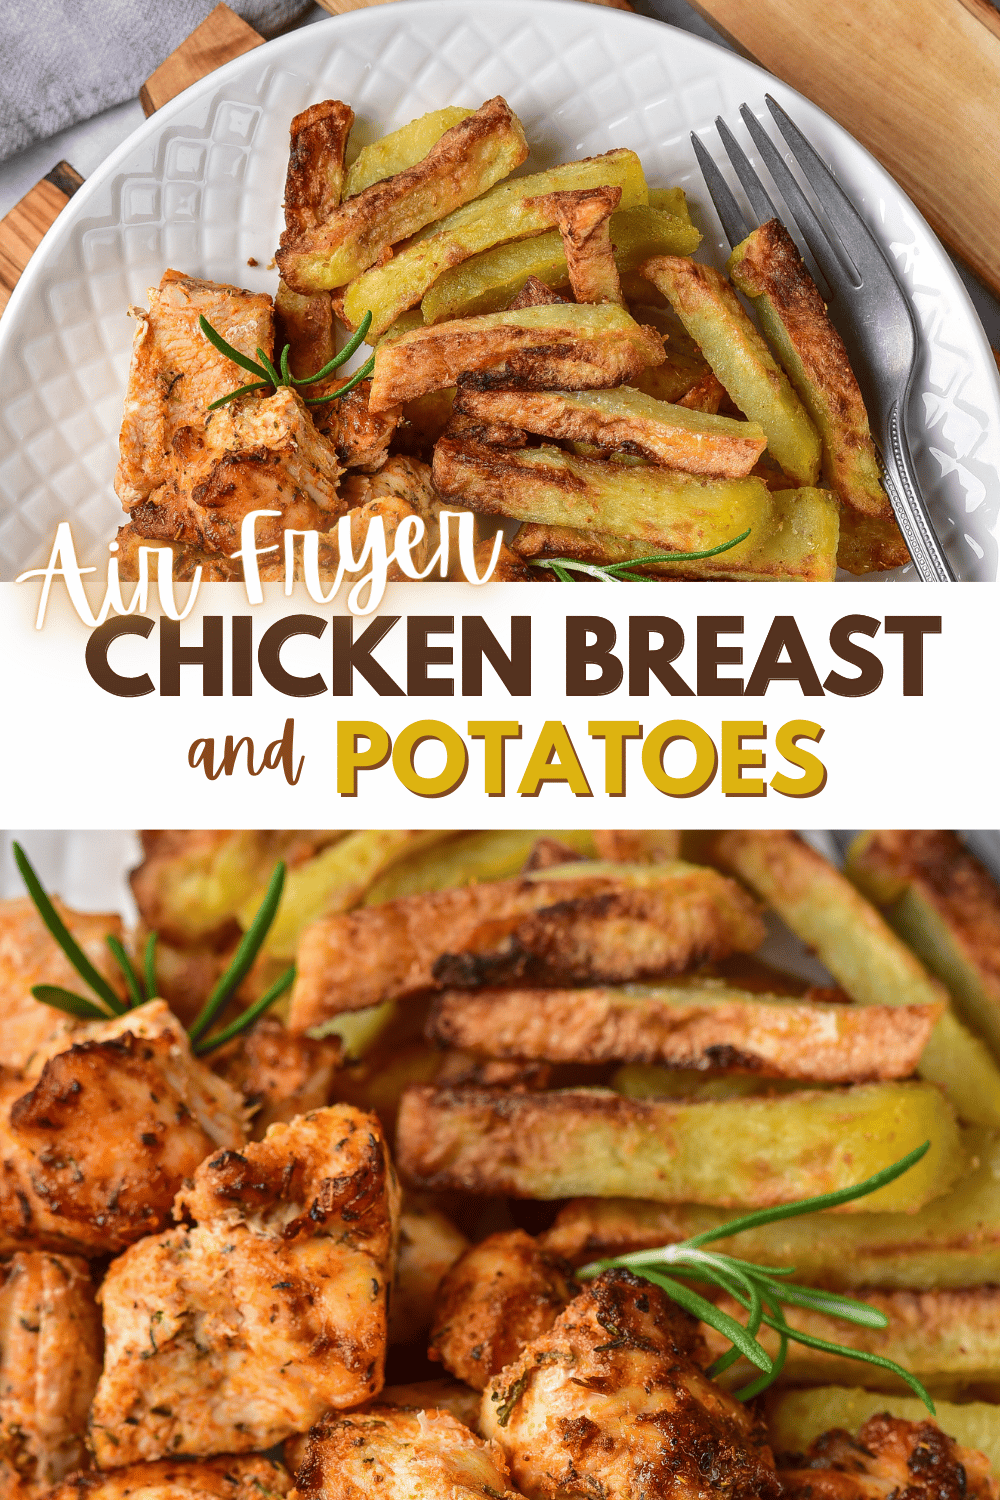 This Air Fryer Chicken Breast and Potatoes recipe is a must-have in your weekly meal rotation. It’s the perfect one-pot meal! #airfryer #chickenbreastandpotatoes #chickenandpotatoes #chicken #potatoes via @wondermomwannab